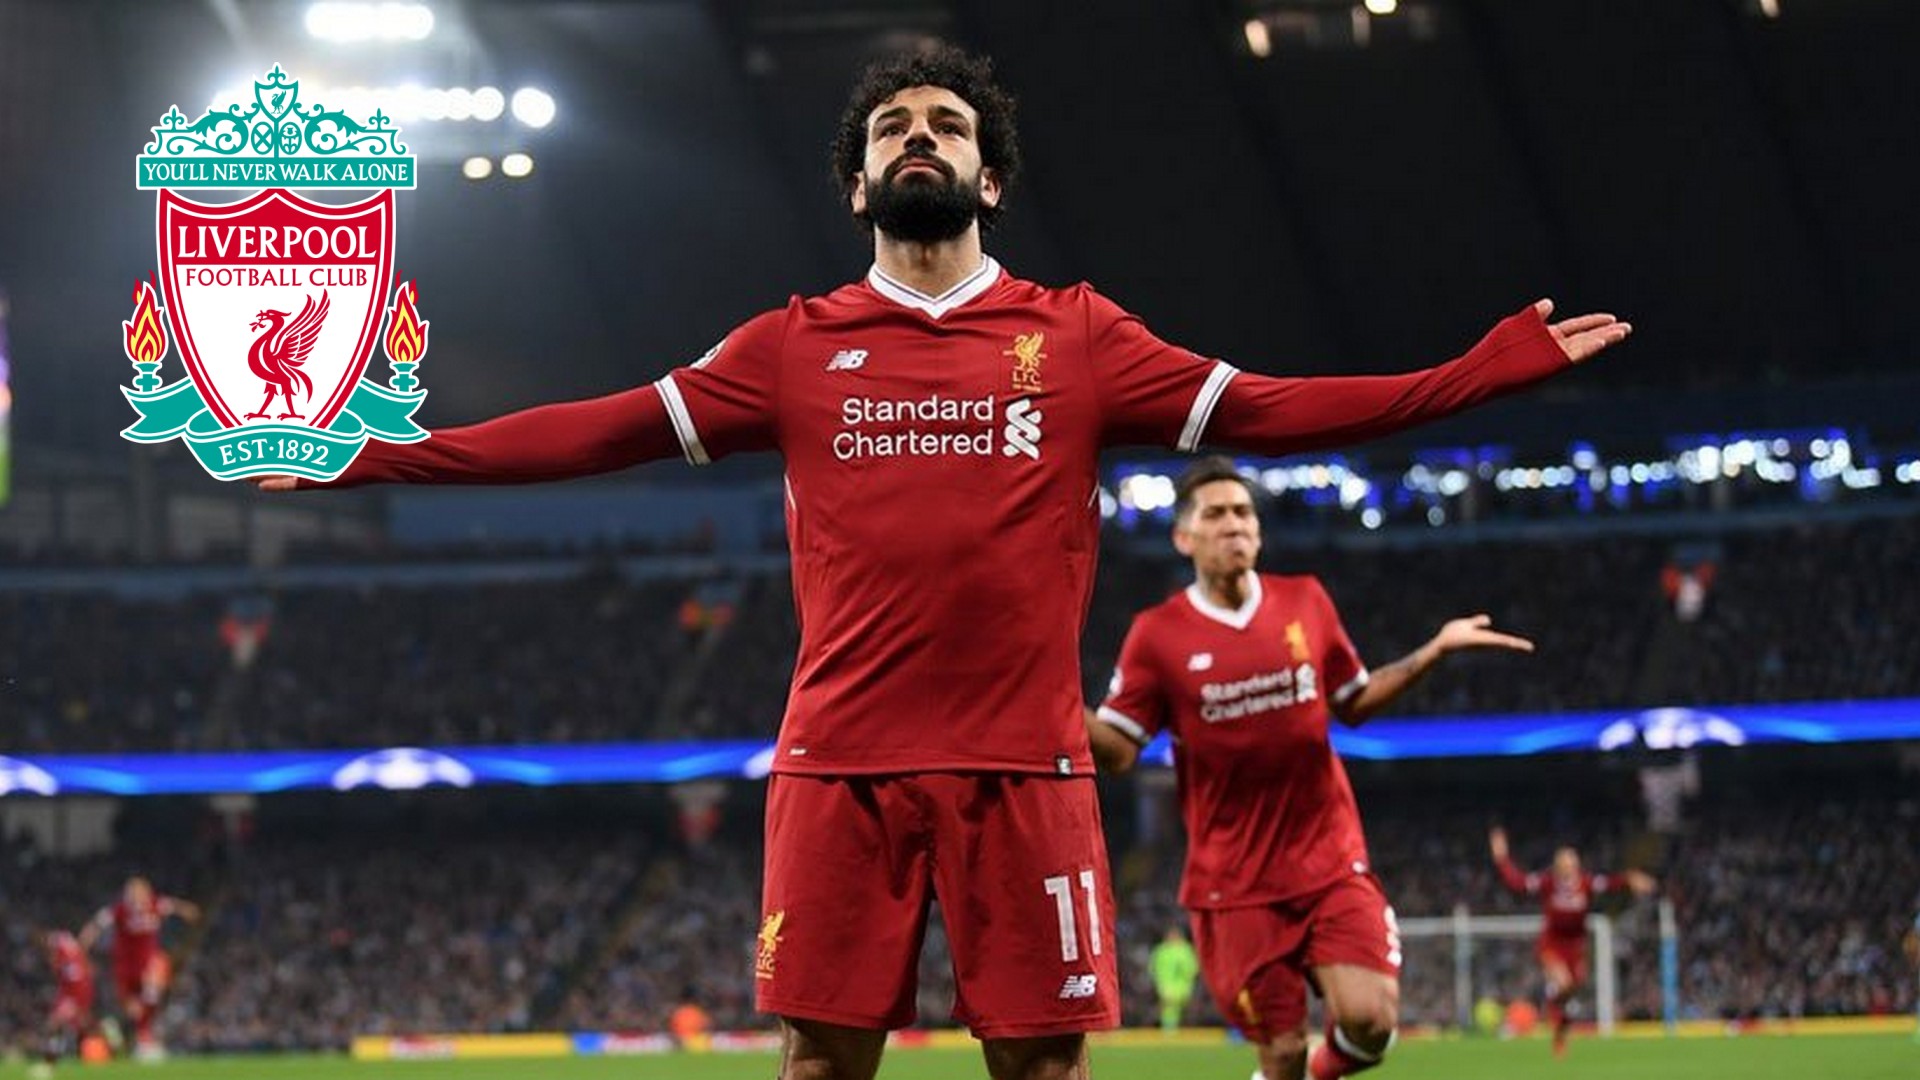 Wallpaper Liverpool Mohamed Salah with image resolution 1920x1080 pixel. You can use this wallpaper as background for your desktop Computer Screensavers, Android or iPhone smartphones